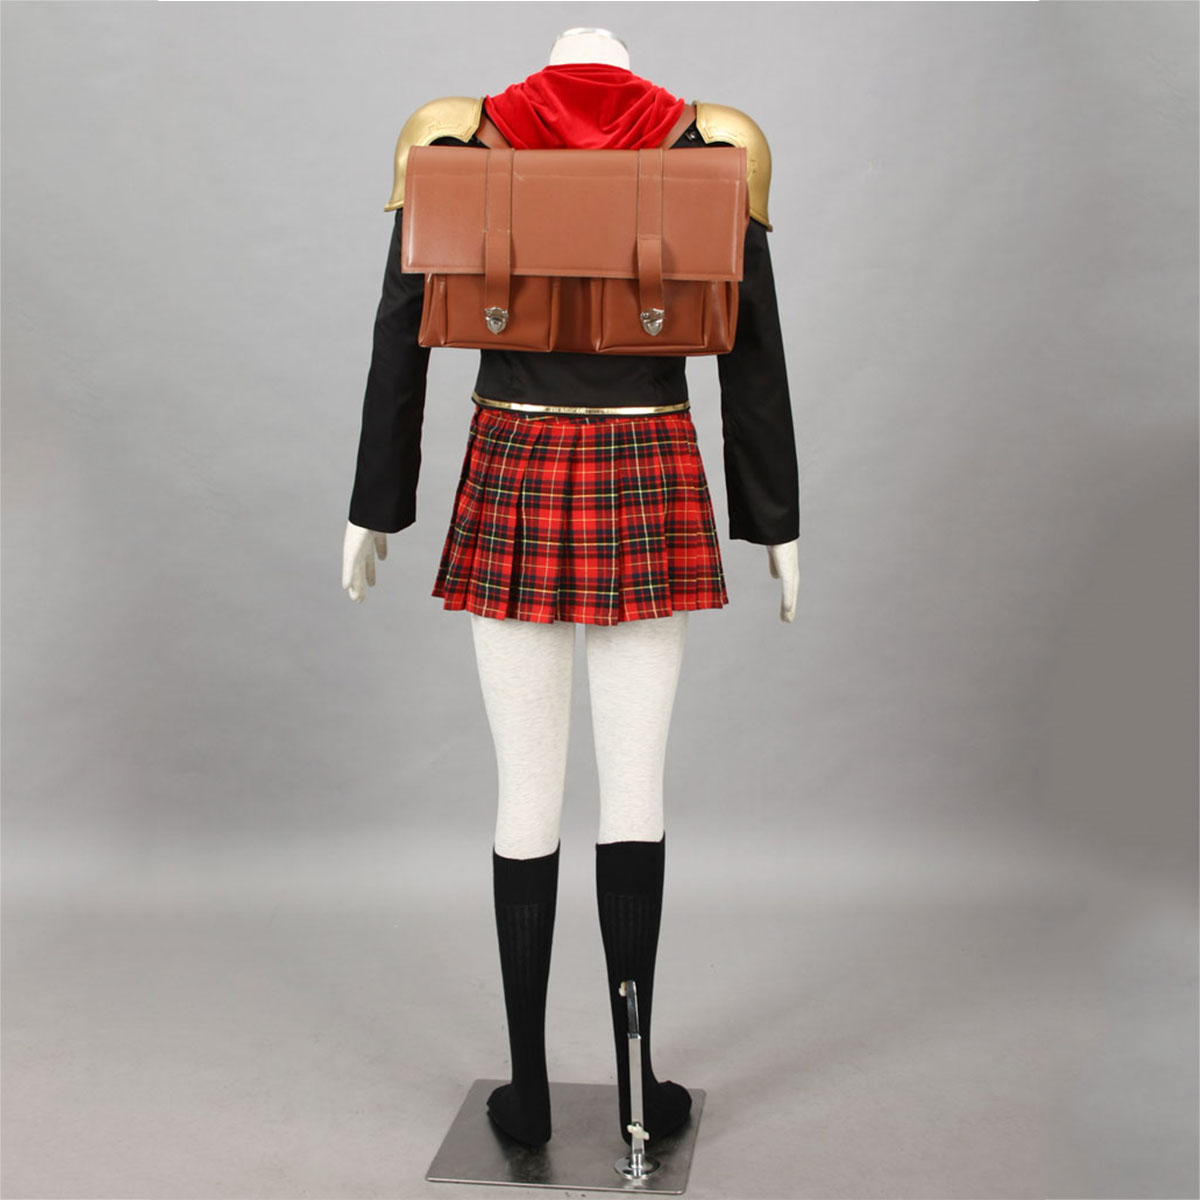 Final Fantasy Type-0 Cater 1 Cosplay Costumes AU